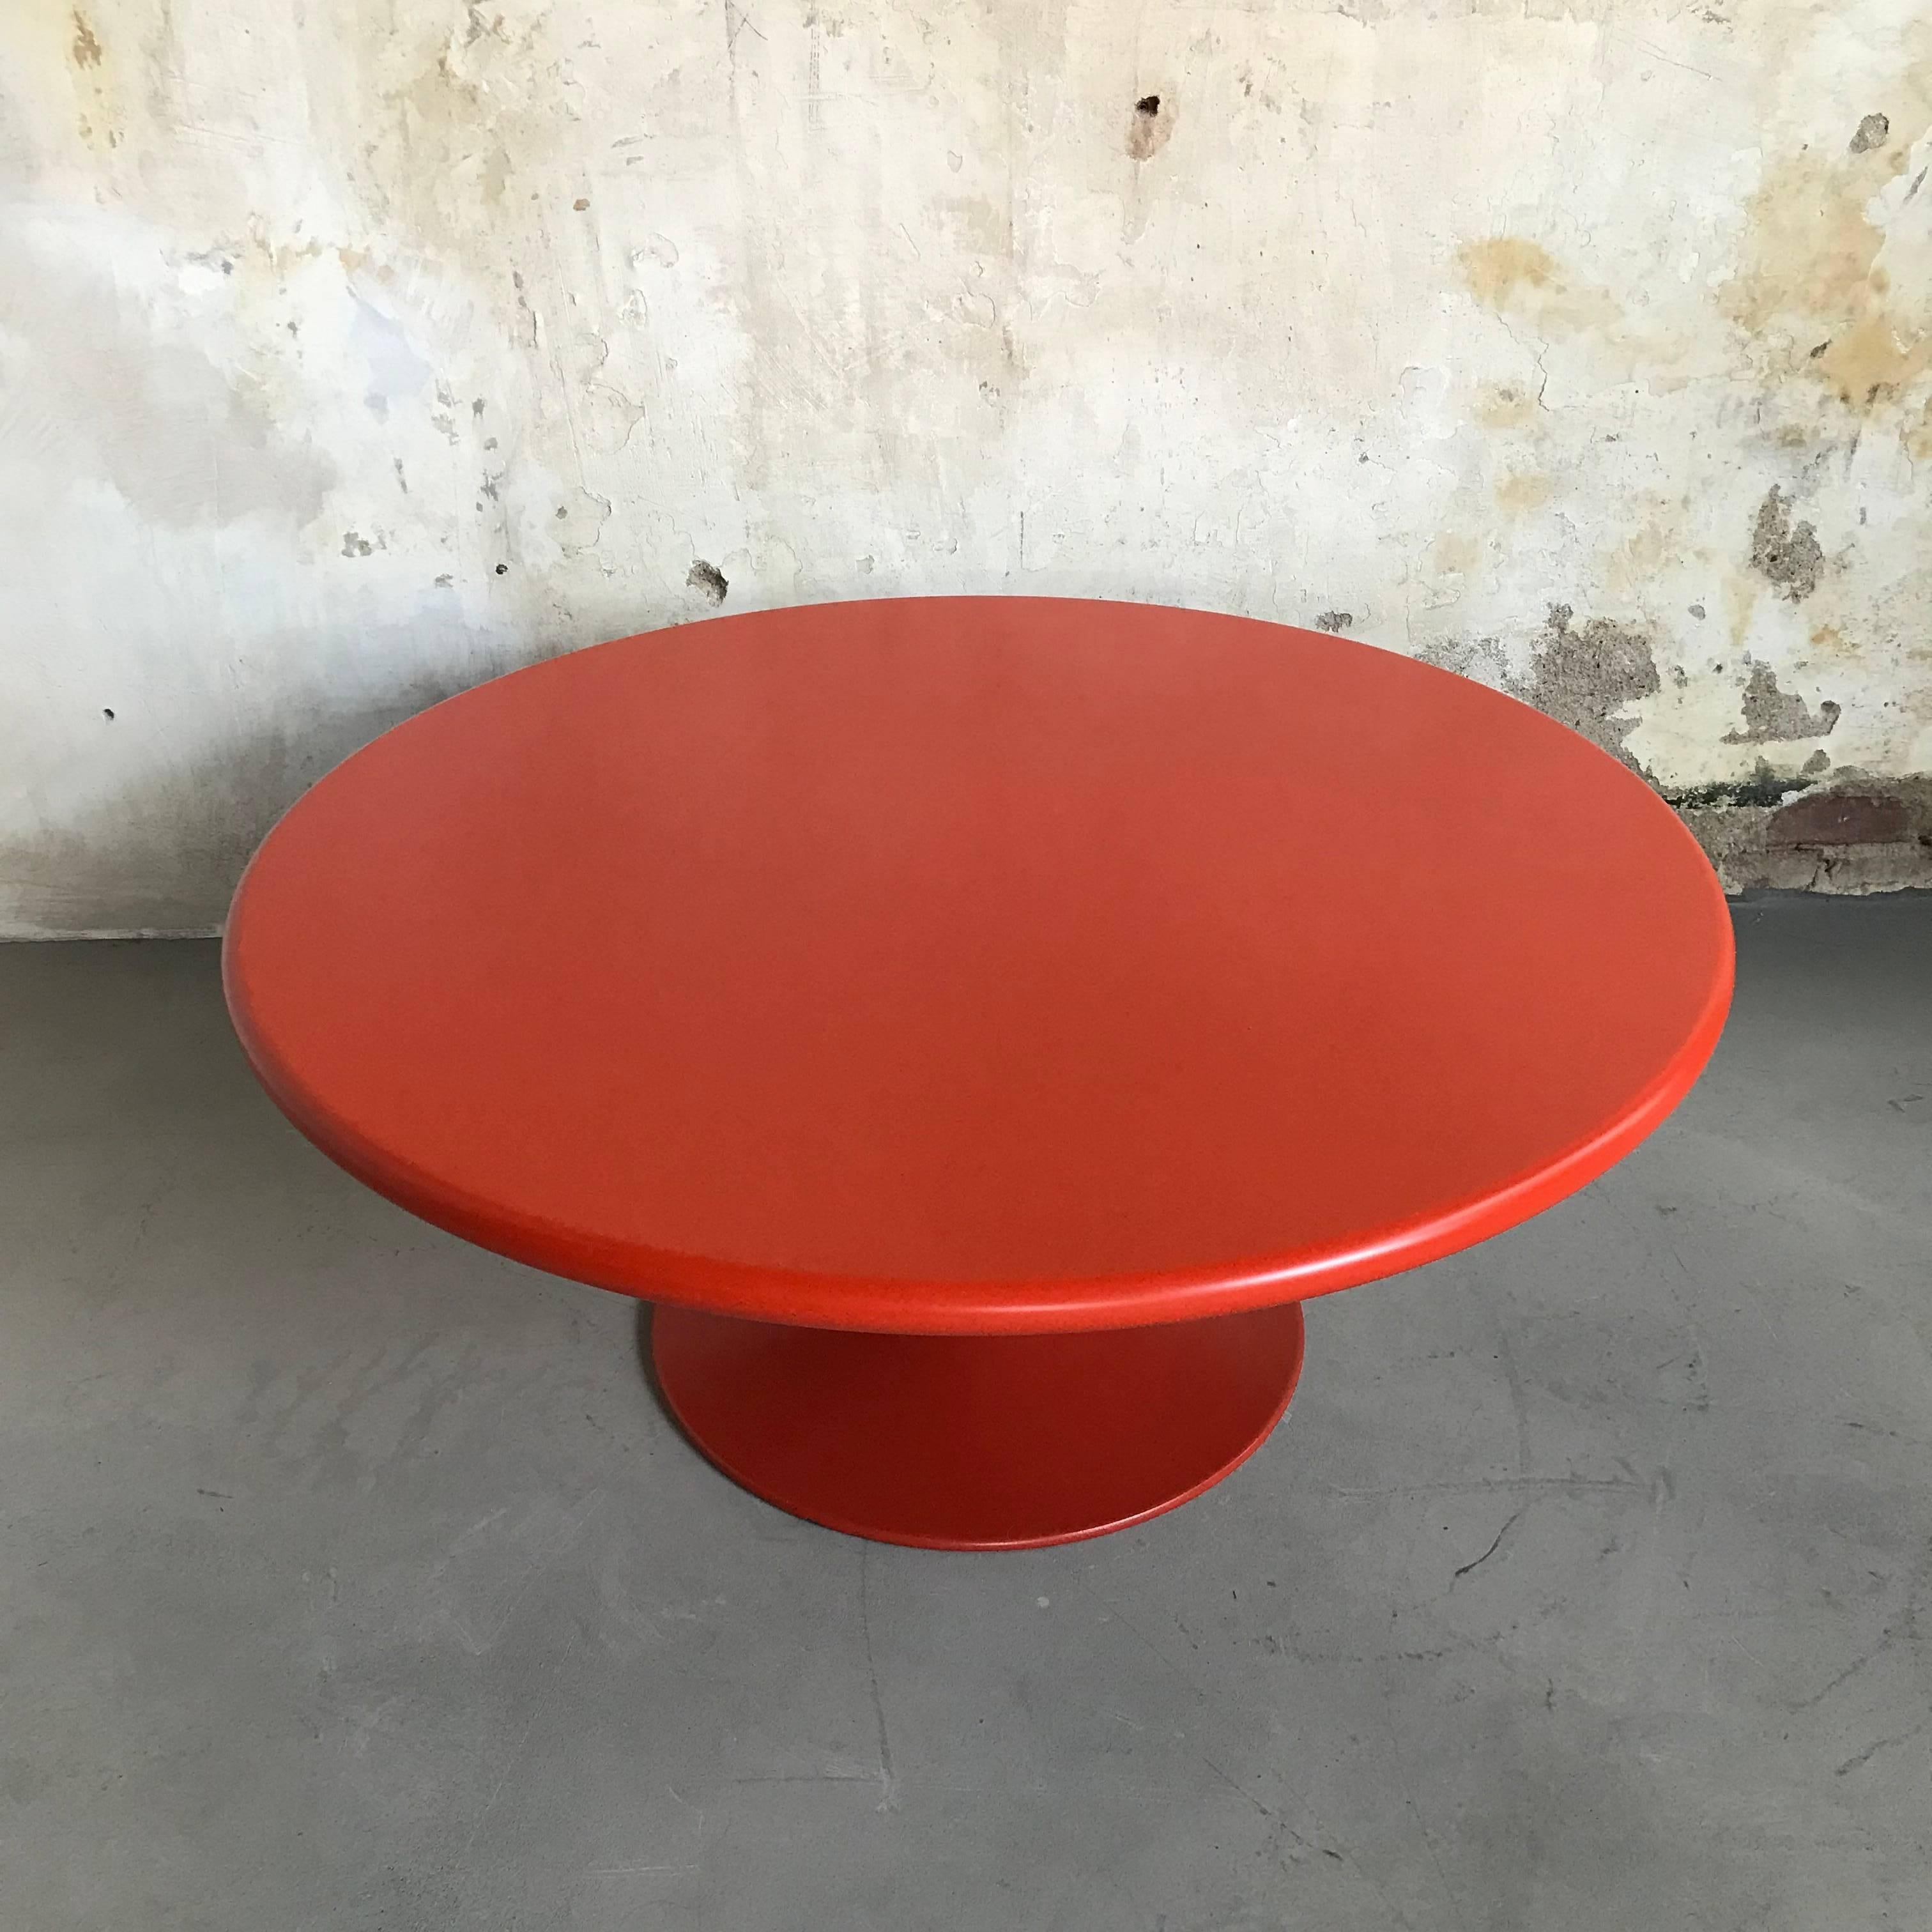 Rare red Artifort coffee table designed by Pierre Paulin. Classic design, iconic and timeless. Heavy, solid quality, so much better than most trendy tables these days. This is the original version, with the round edge.
Measurements: ø 89 cm, H 38